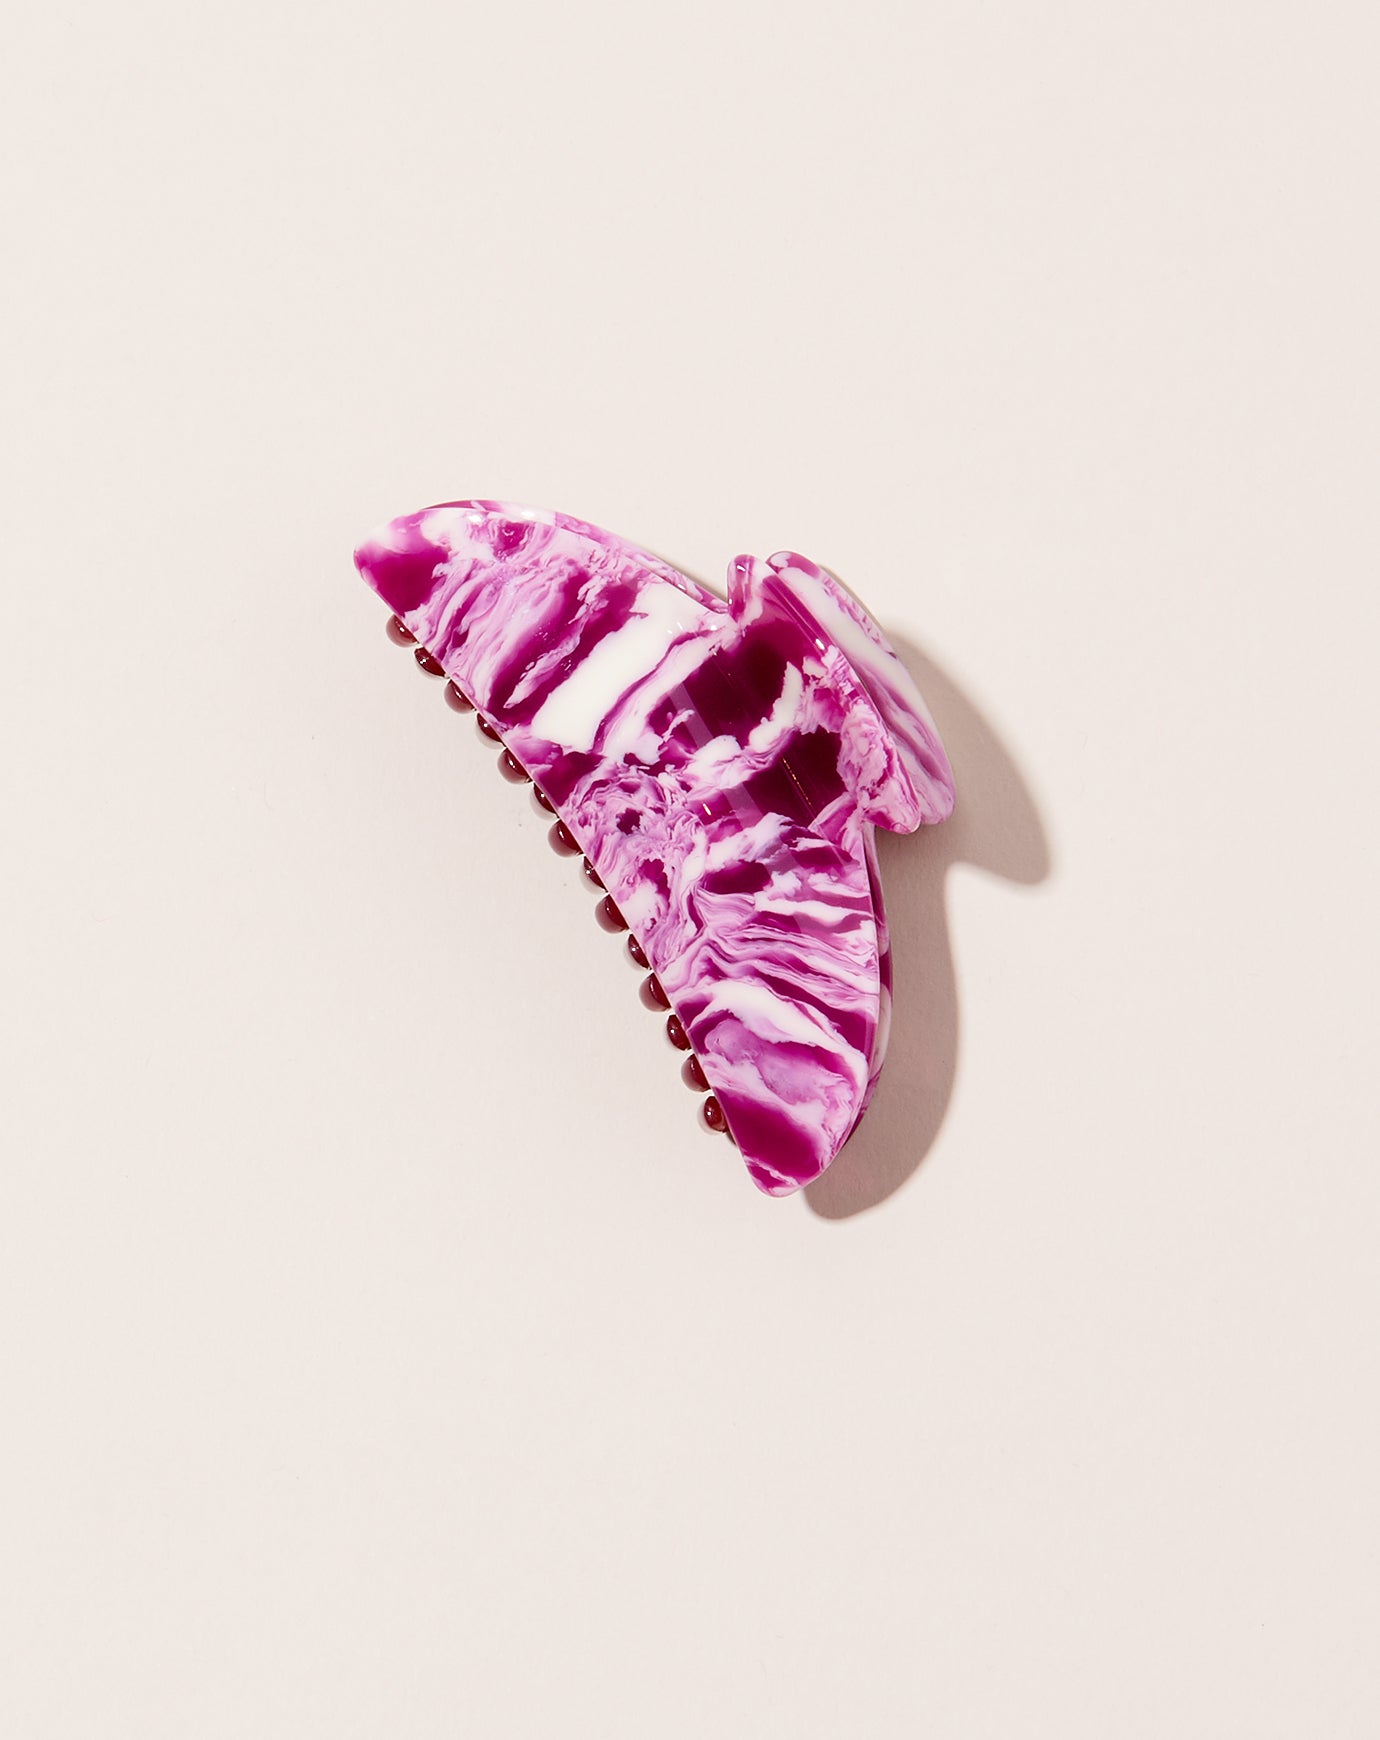 Machete Midi Heirloom Claw in Marbled Orchid